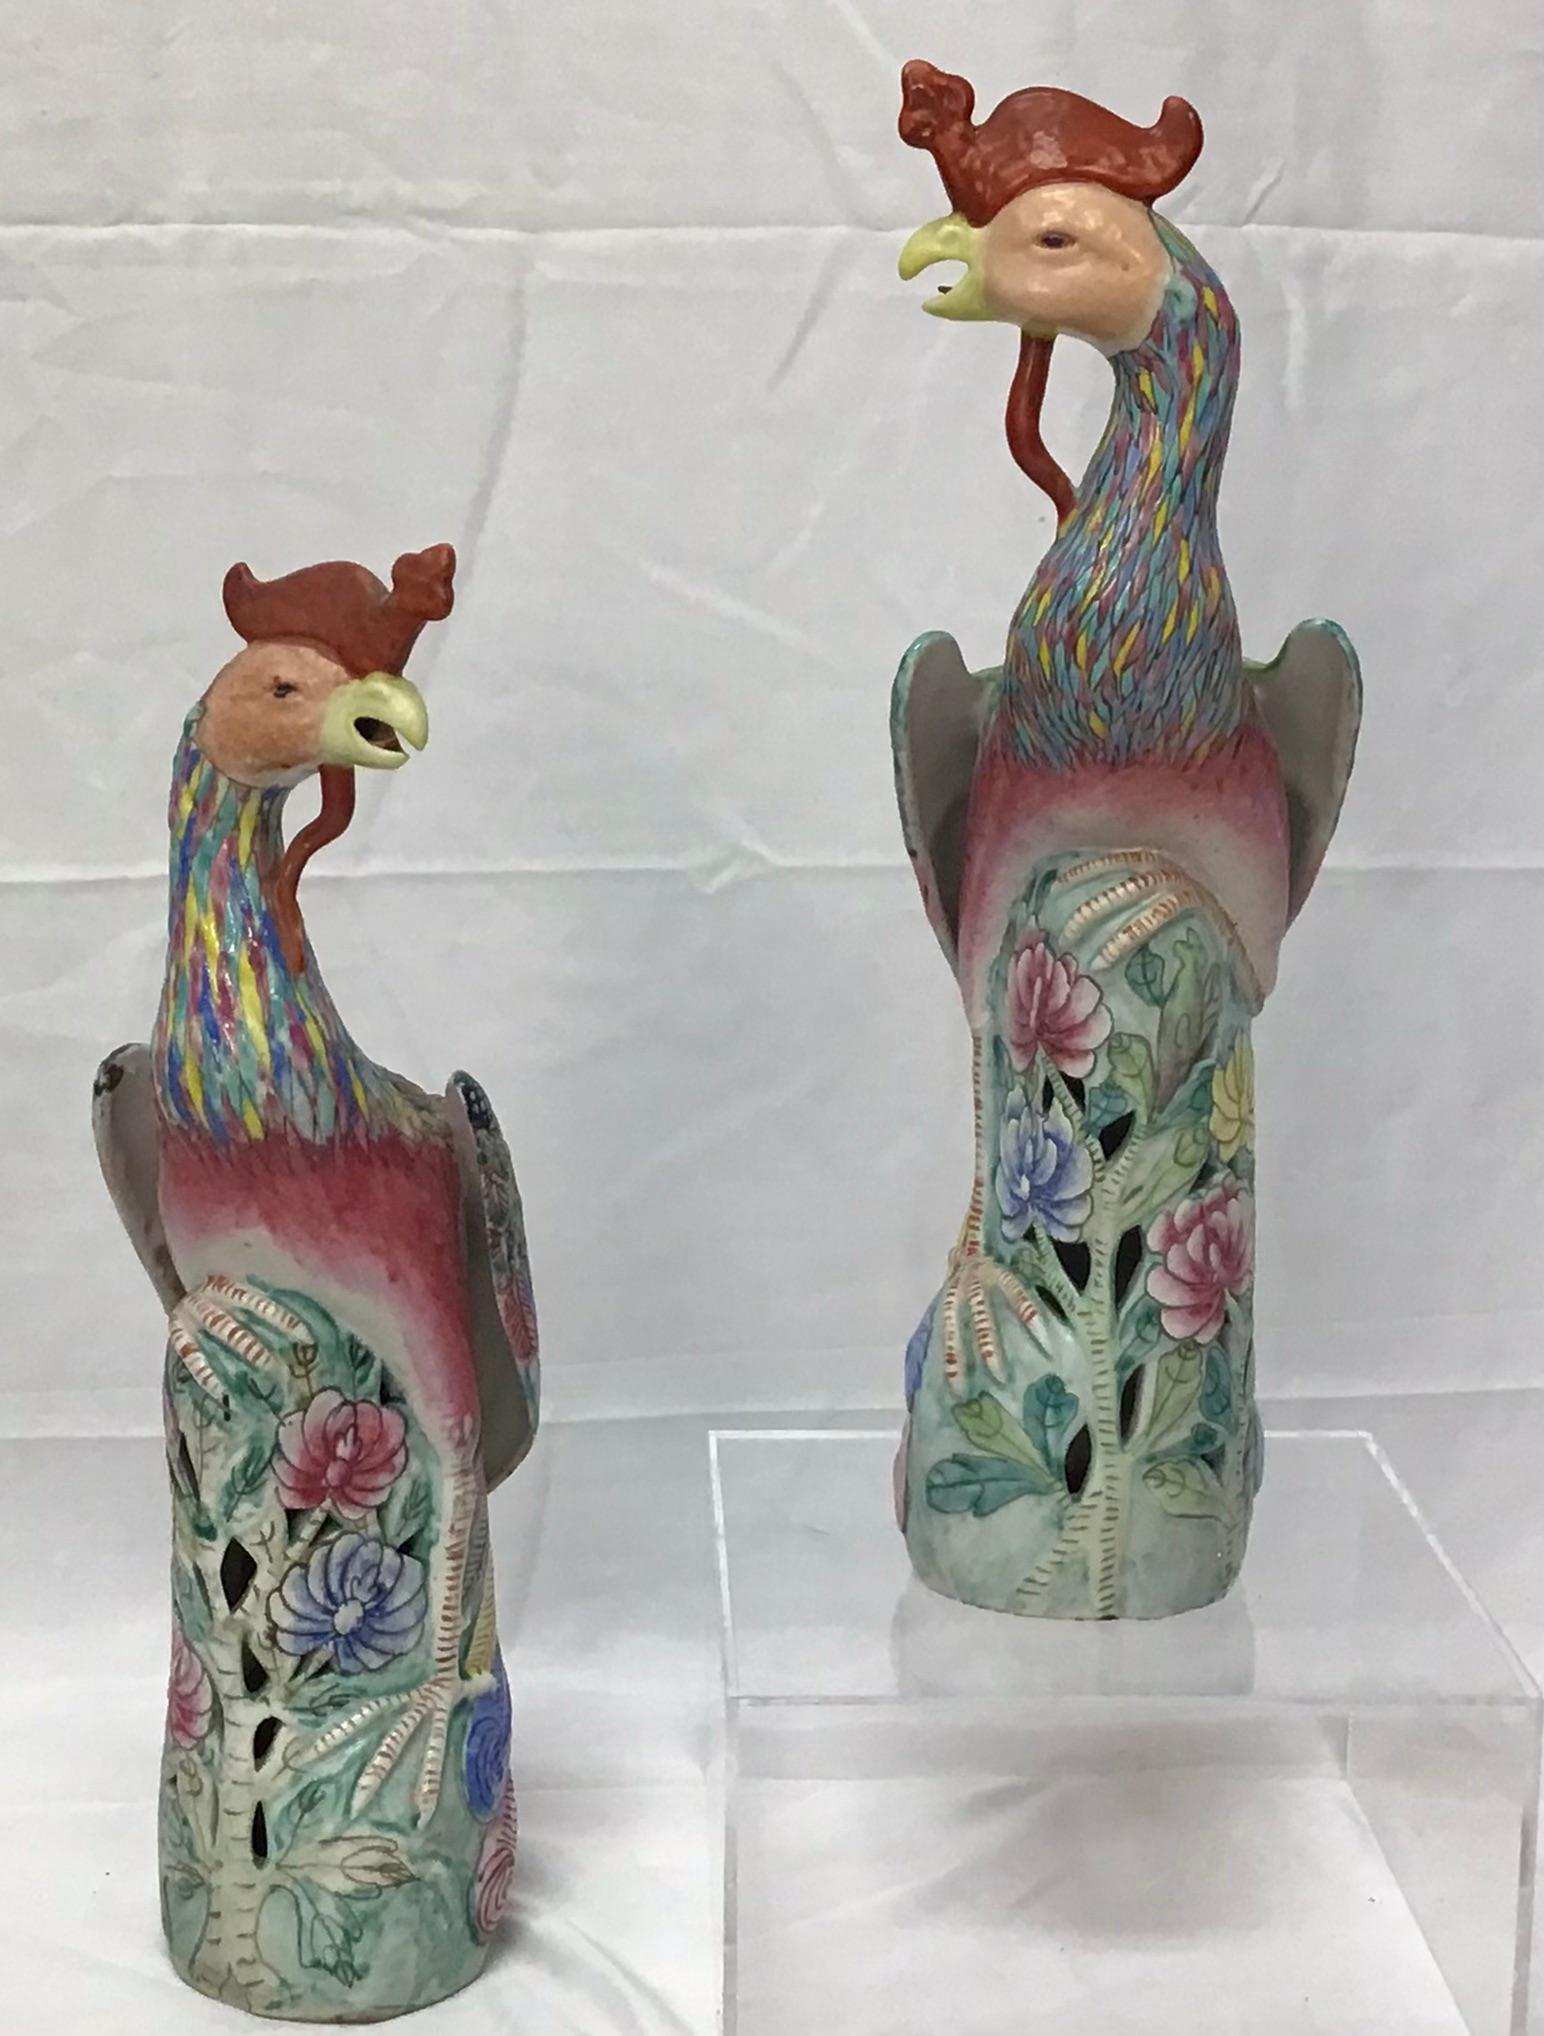 A wonderful pair of porcelain Chinese export models of roosters. A mirror-image pair of finely modeled porcelain roosters in polychrome glaze; each with great detail seen in their heads, eyes, combs and wattles; their finely-painted feathers in a